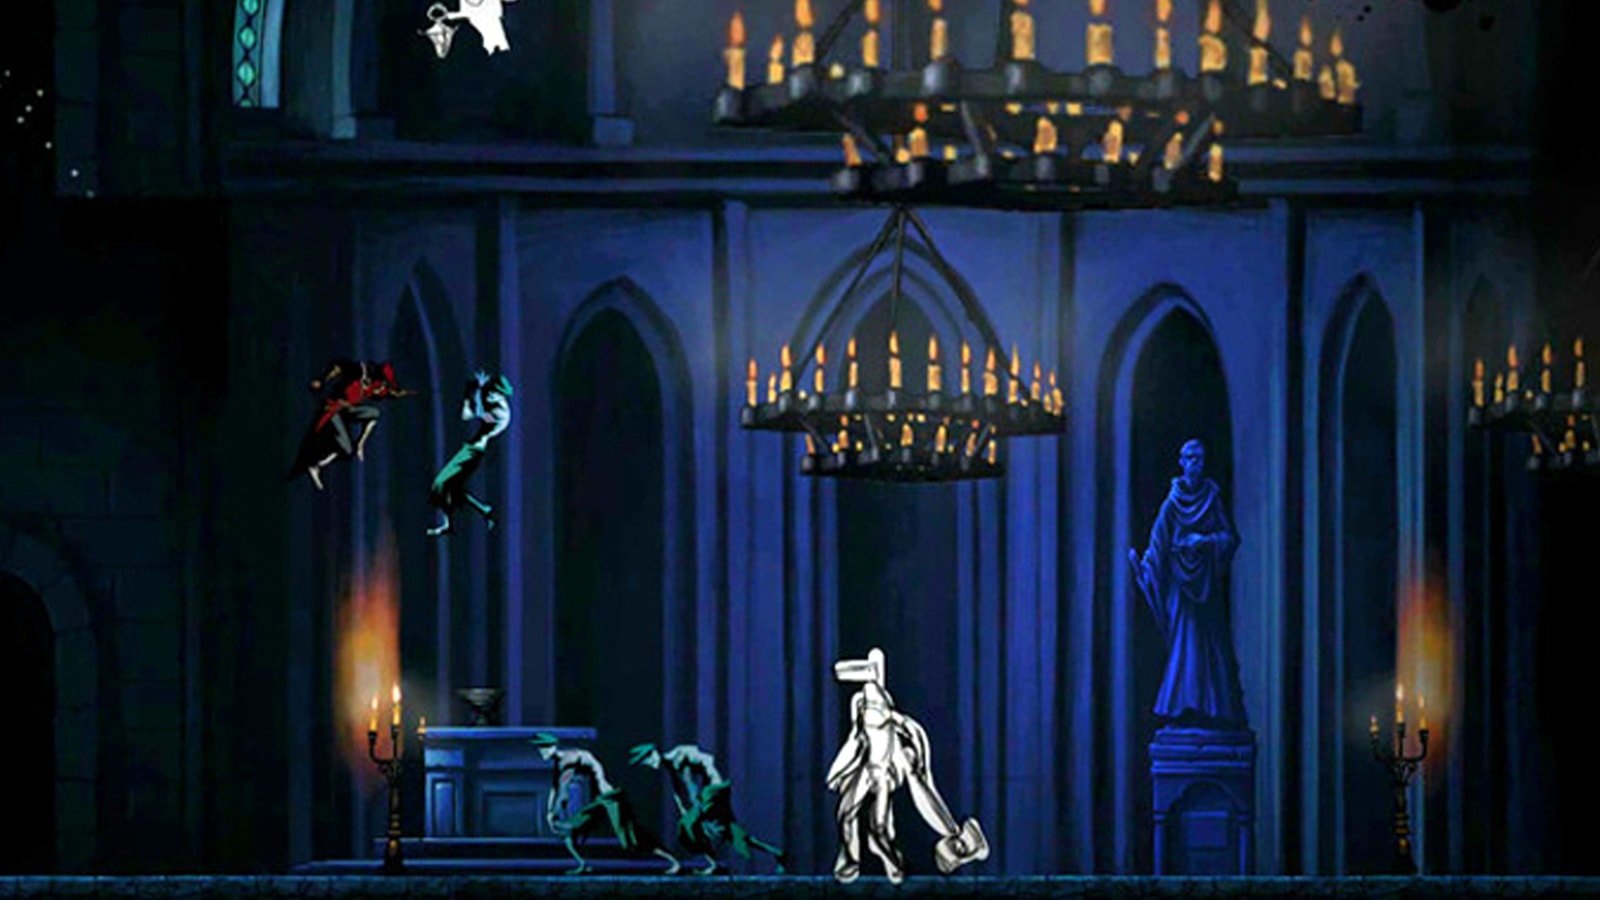 A swordsman in red fights a green zombie in midair in a spooky church.